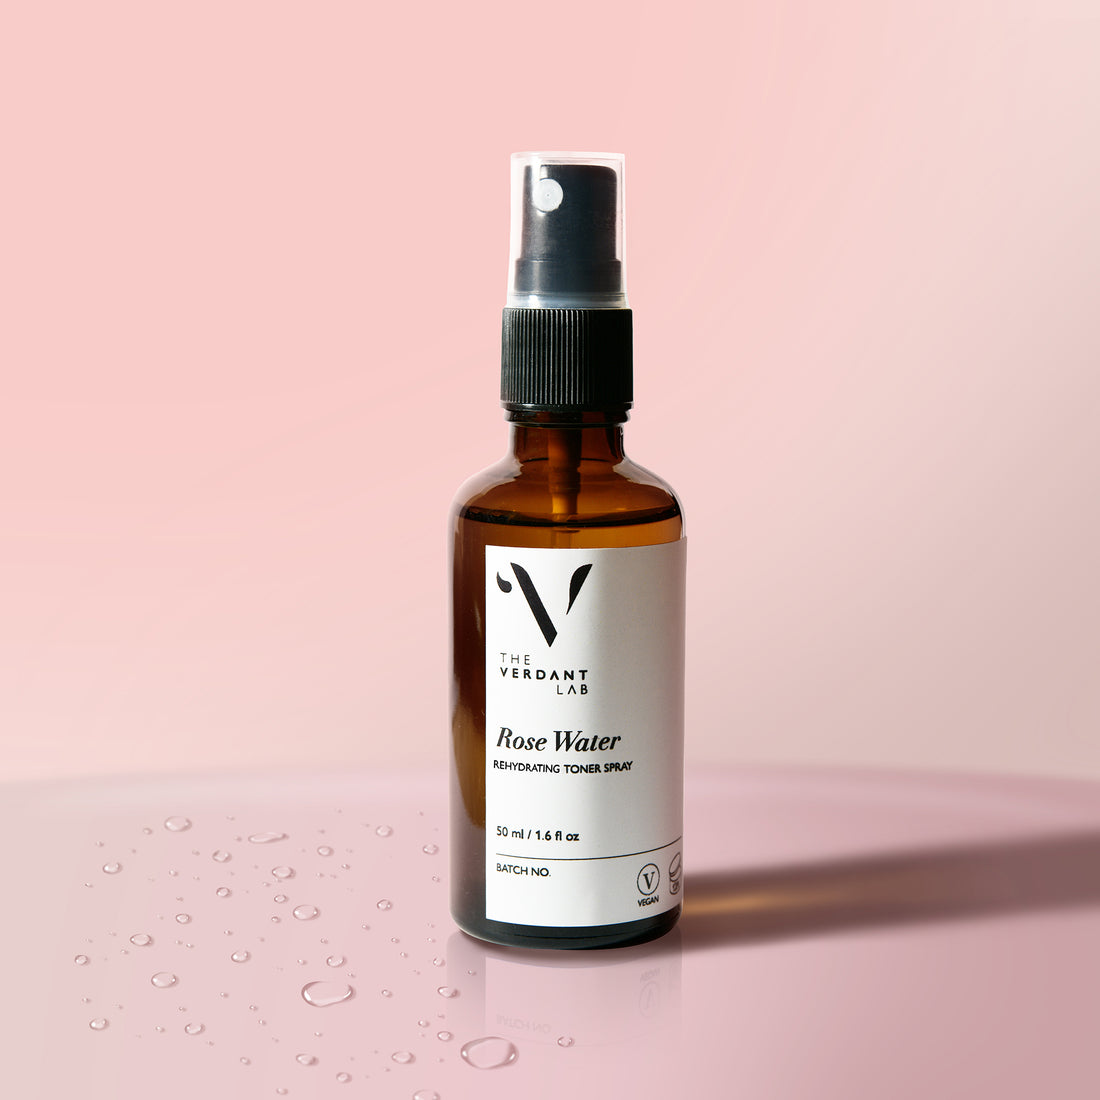 Rose Water and the Importance of Toners | The Verdant Lab Skin